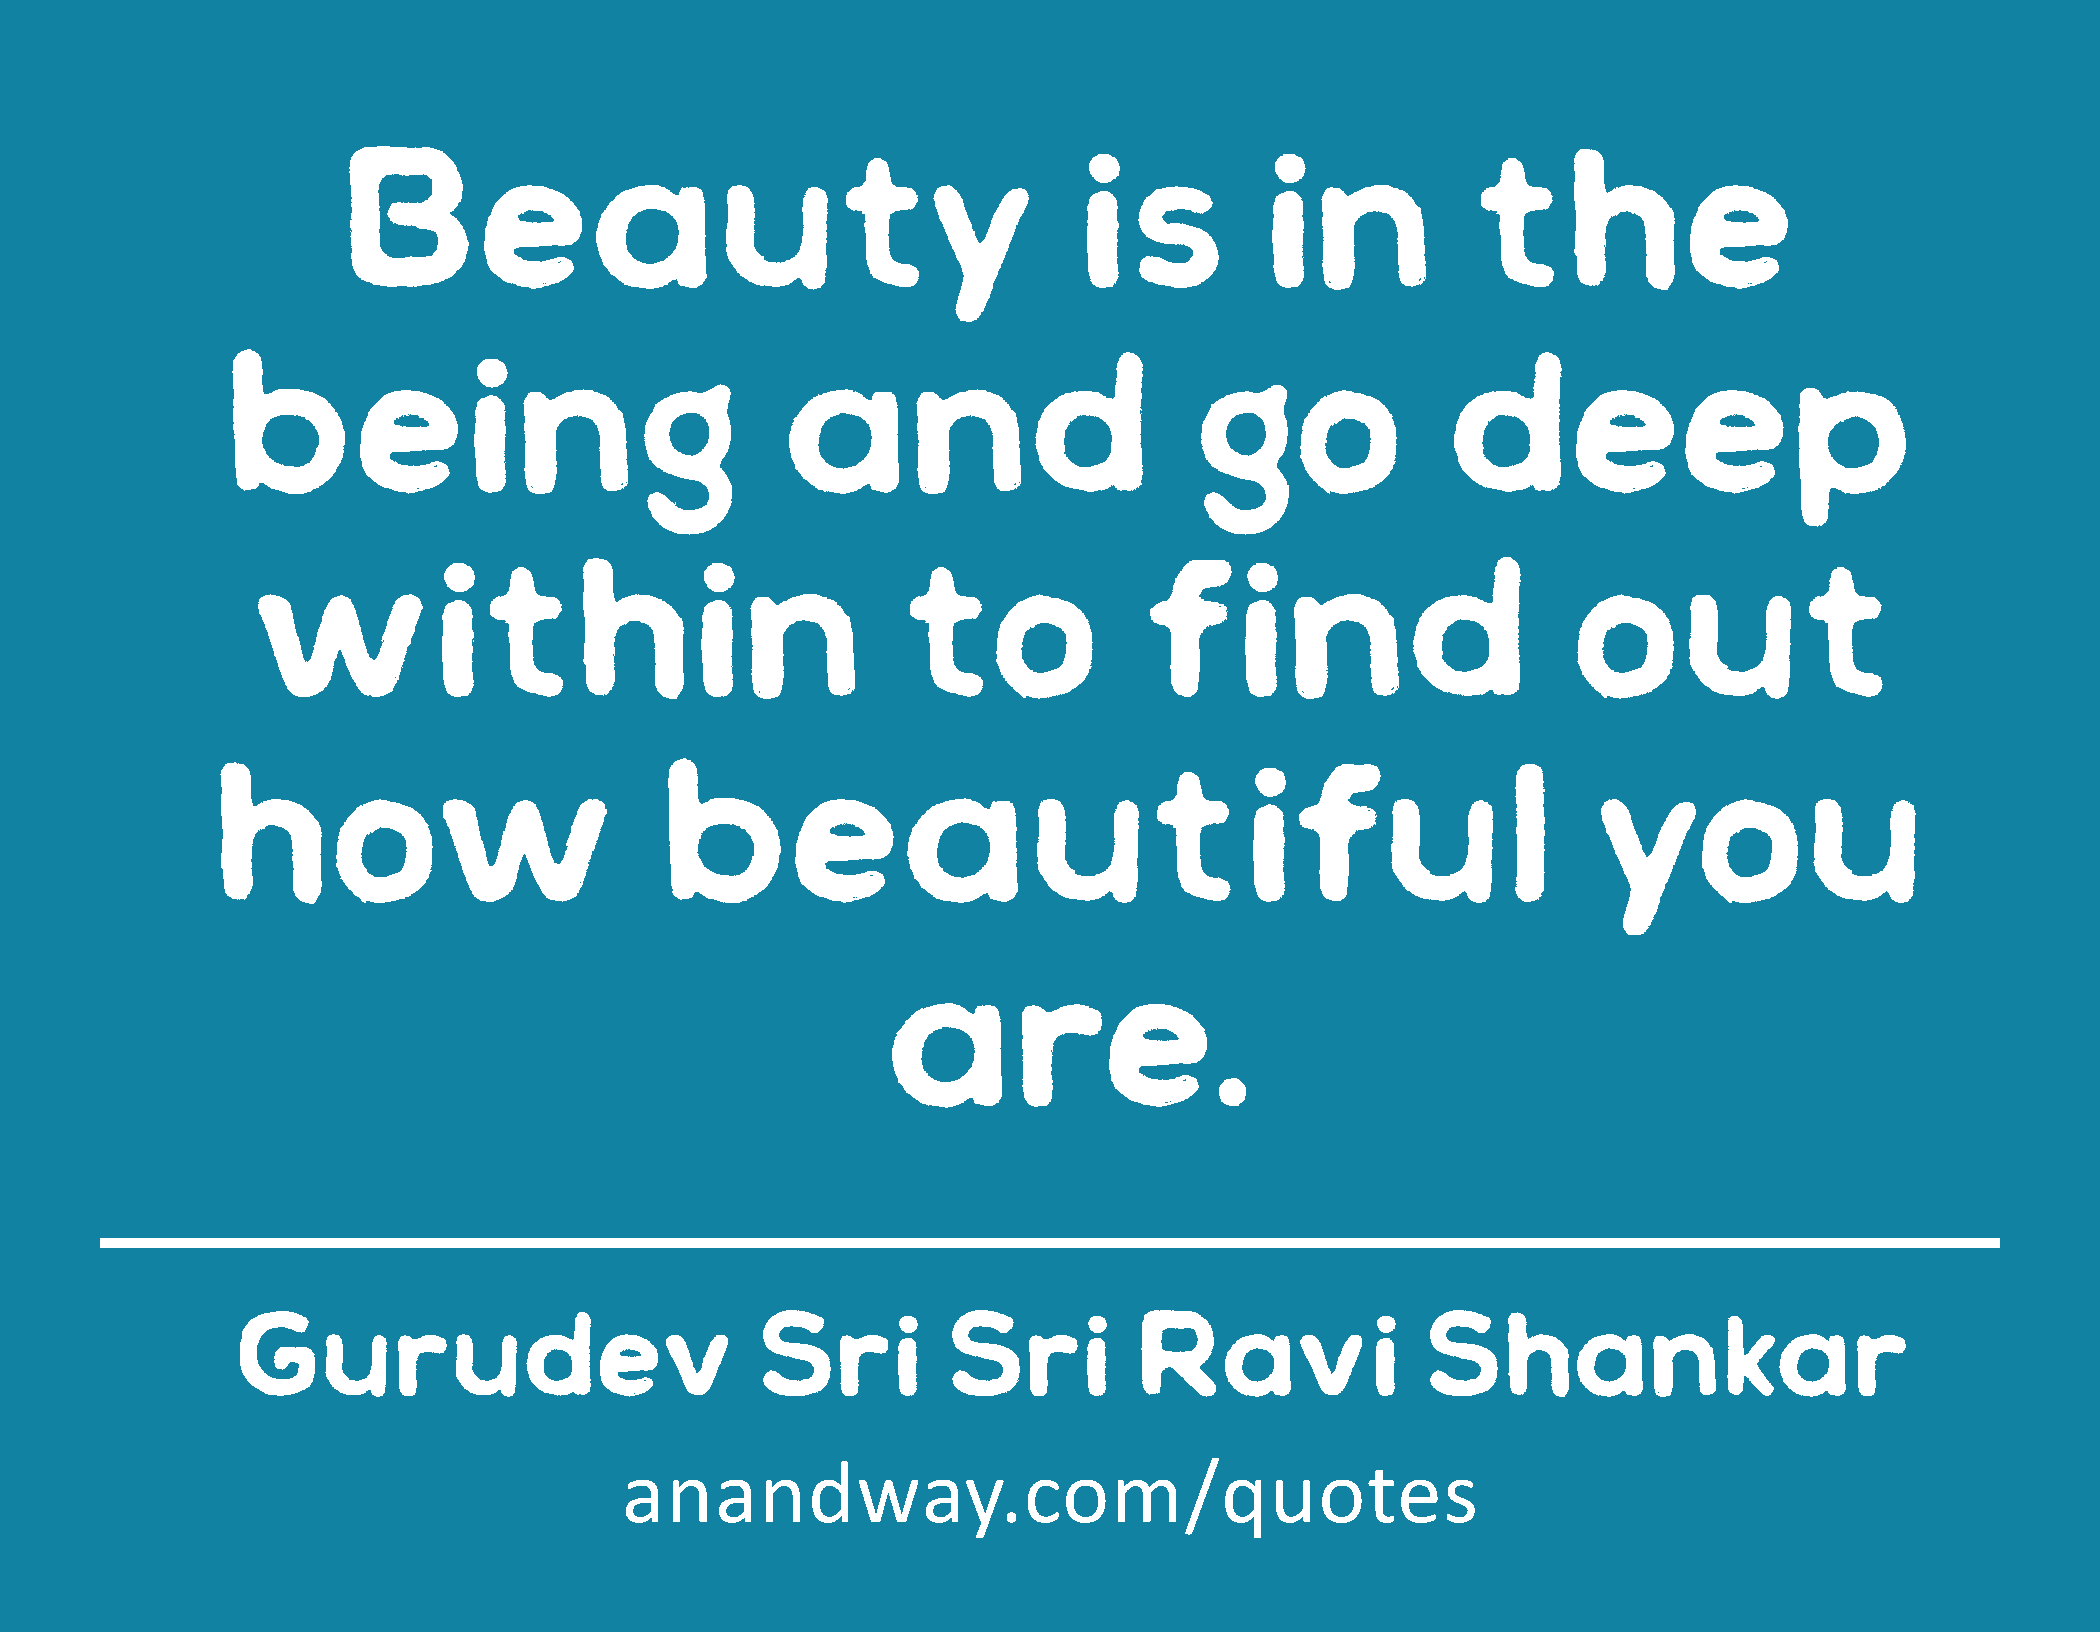 Beauty is in the being and go deep within to find out how beautiful you are. 
 -Gurudev Sri Sri Ravi Shankar